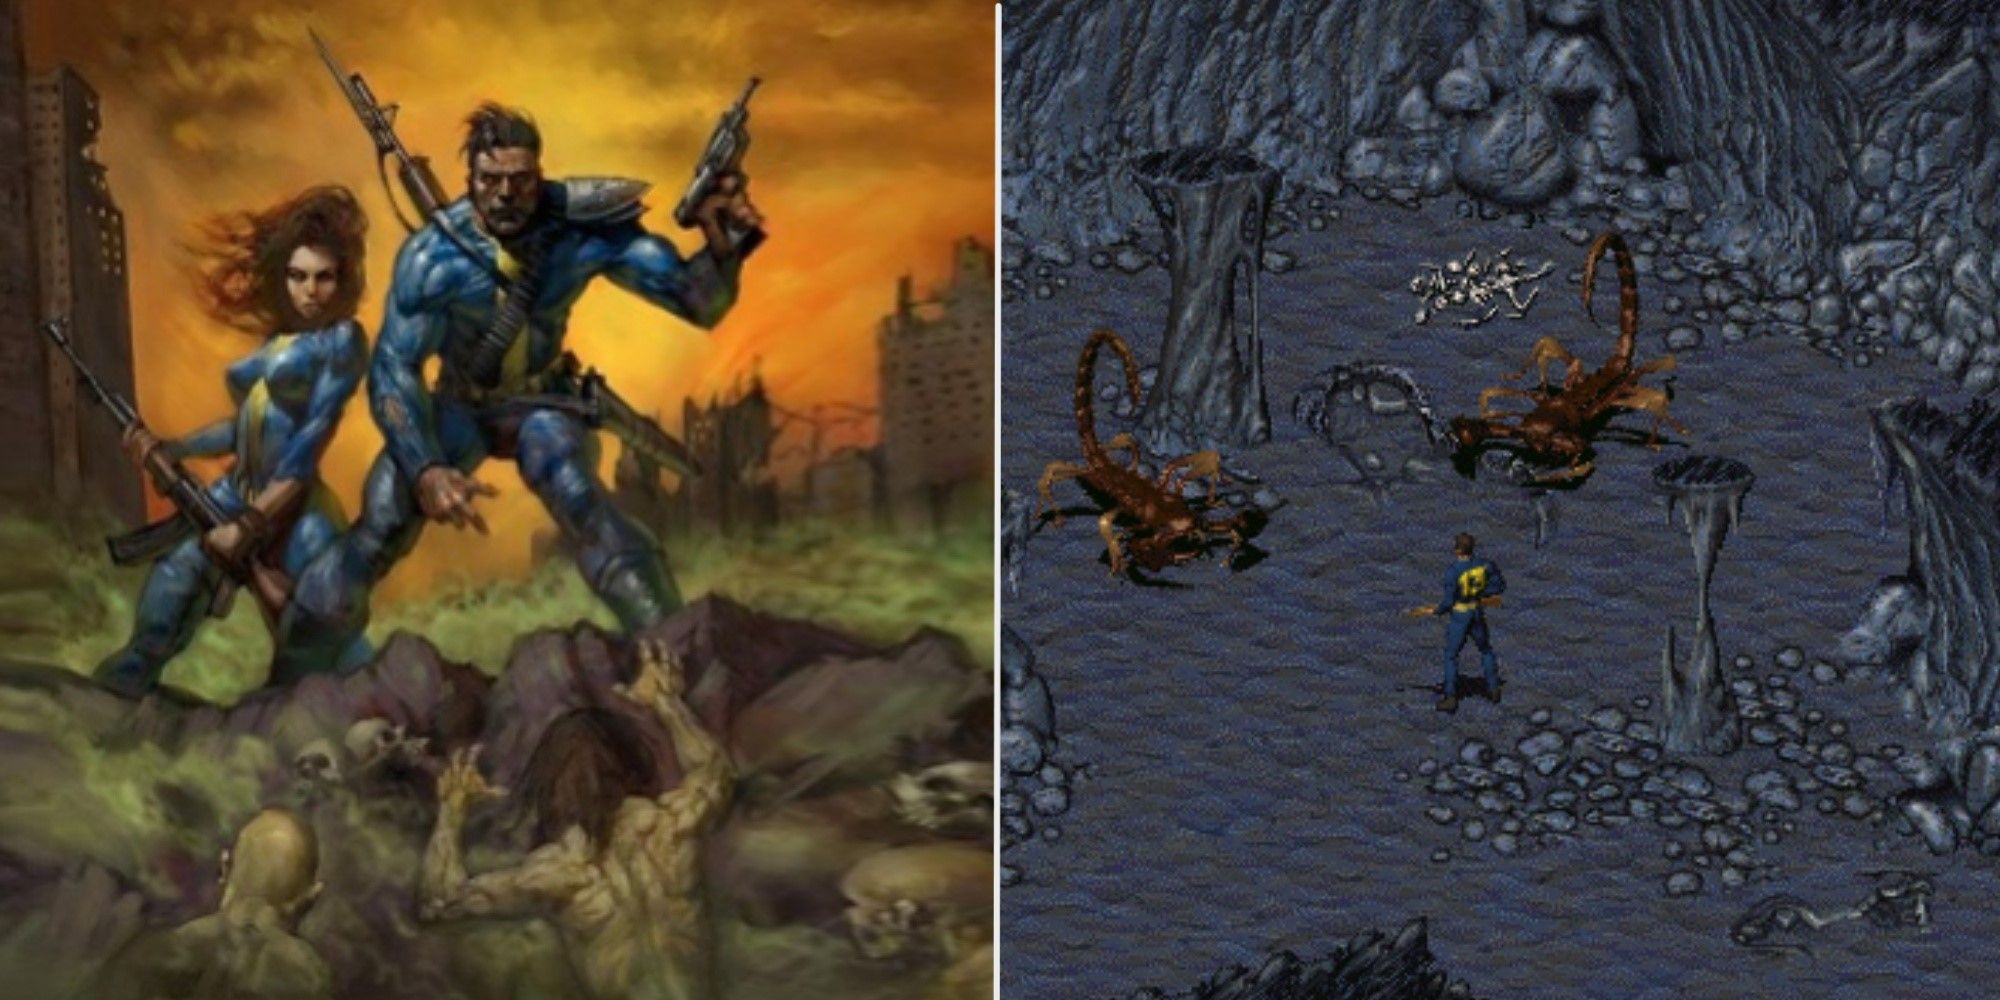 A split image showing the Fallout cover and some gameplay